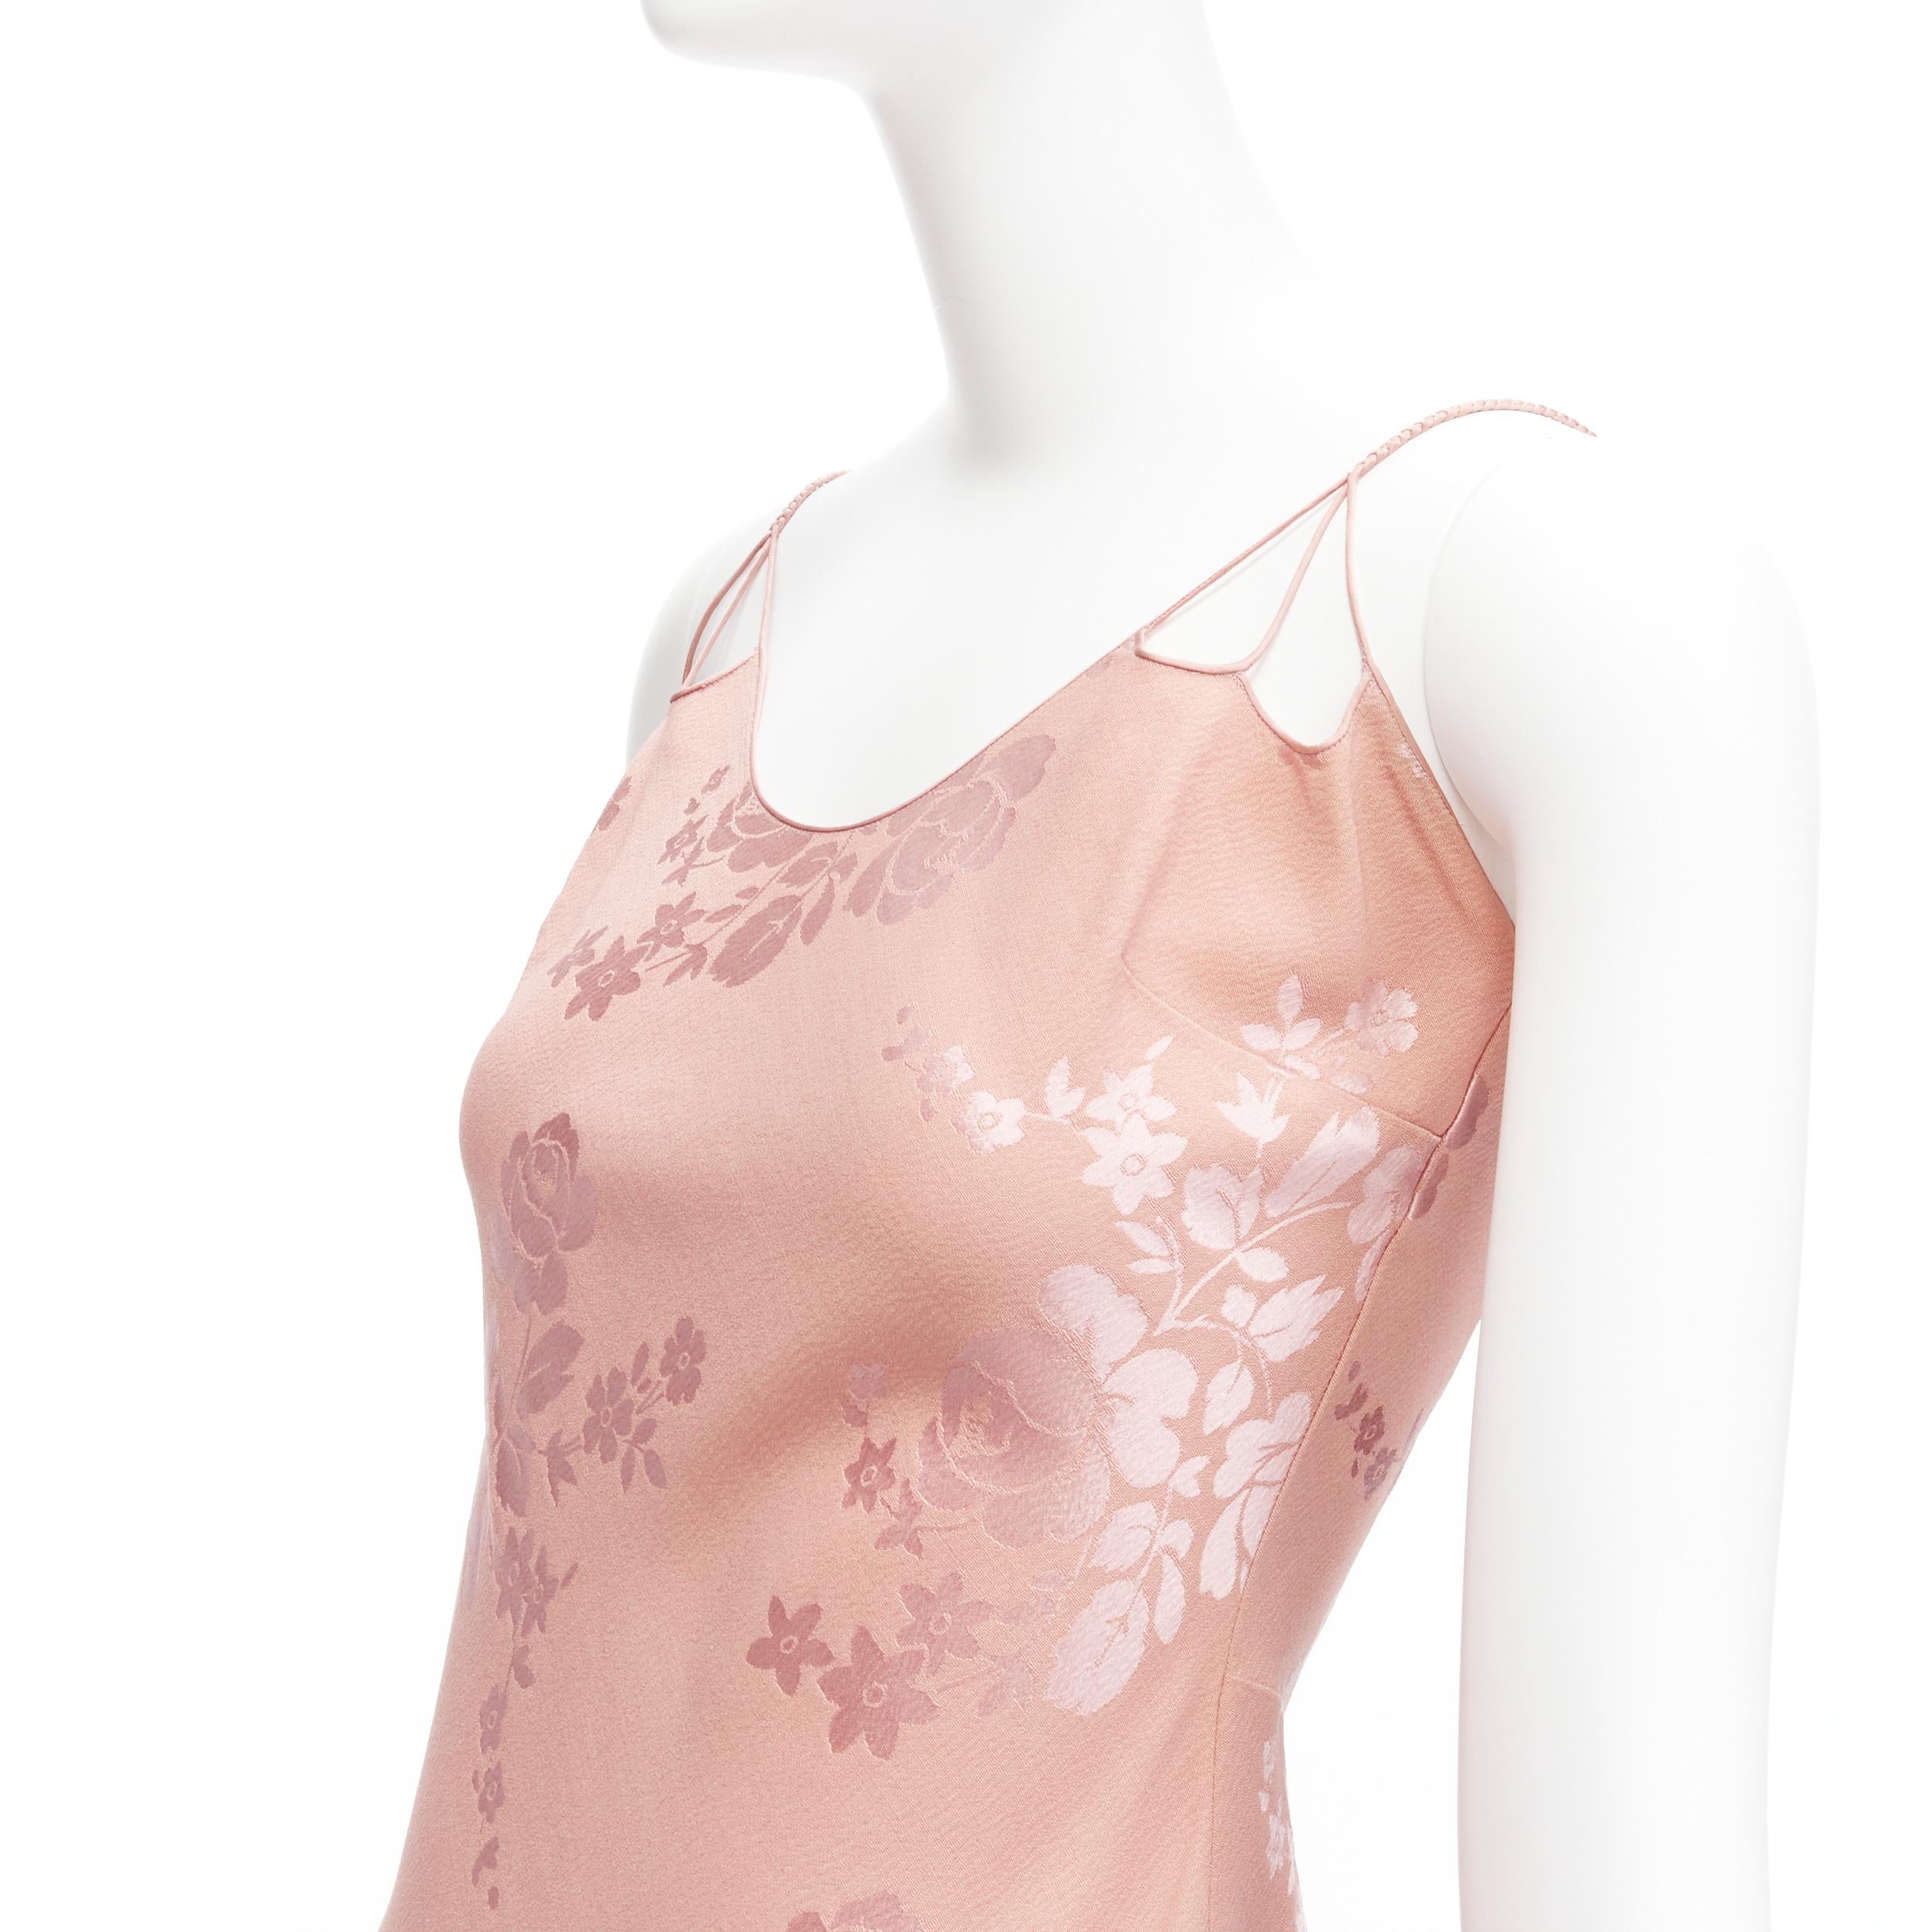 CHRISTIAN DIOR Galliano Vintage 2009 pink oriental floral jacquard evening dress FR36 S
Reference: TGAS/D00244
Brand: Christian Dior
Designer: John Galliano
Collection: 2009
Material: Wool, Silk
Color: Pink
Pattern: Floral
Closure: Pullover
Extra